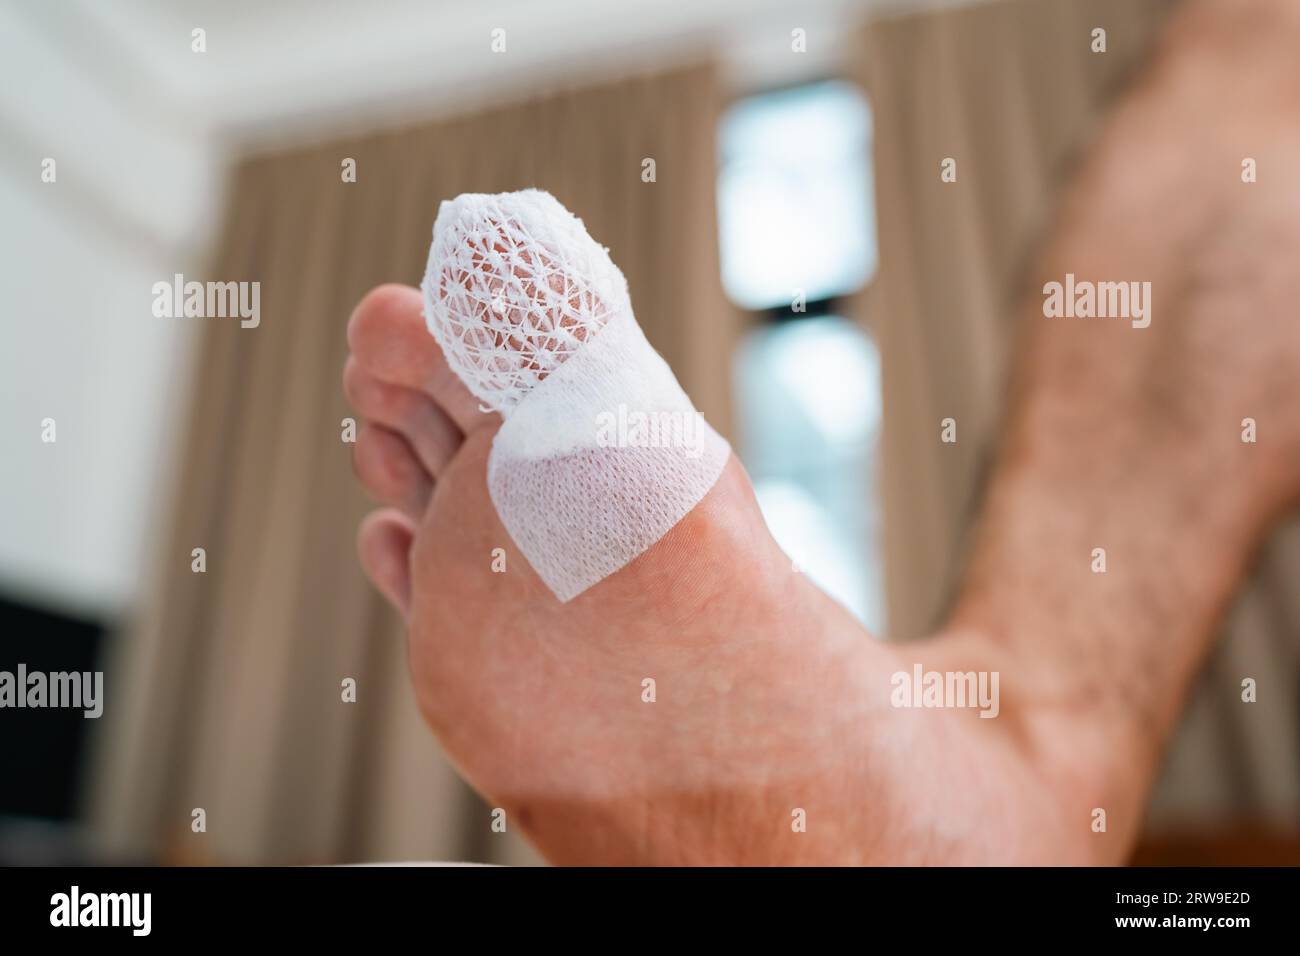 an injured toe with net bandage 2RW9E2D